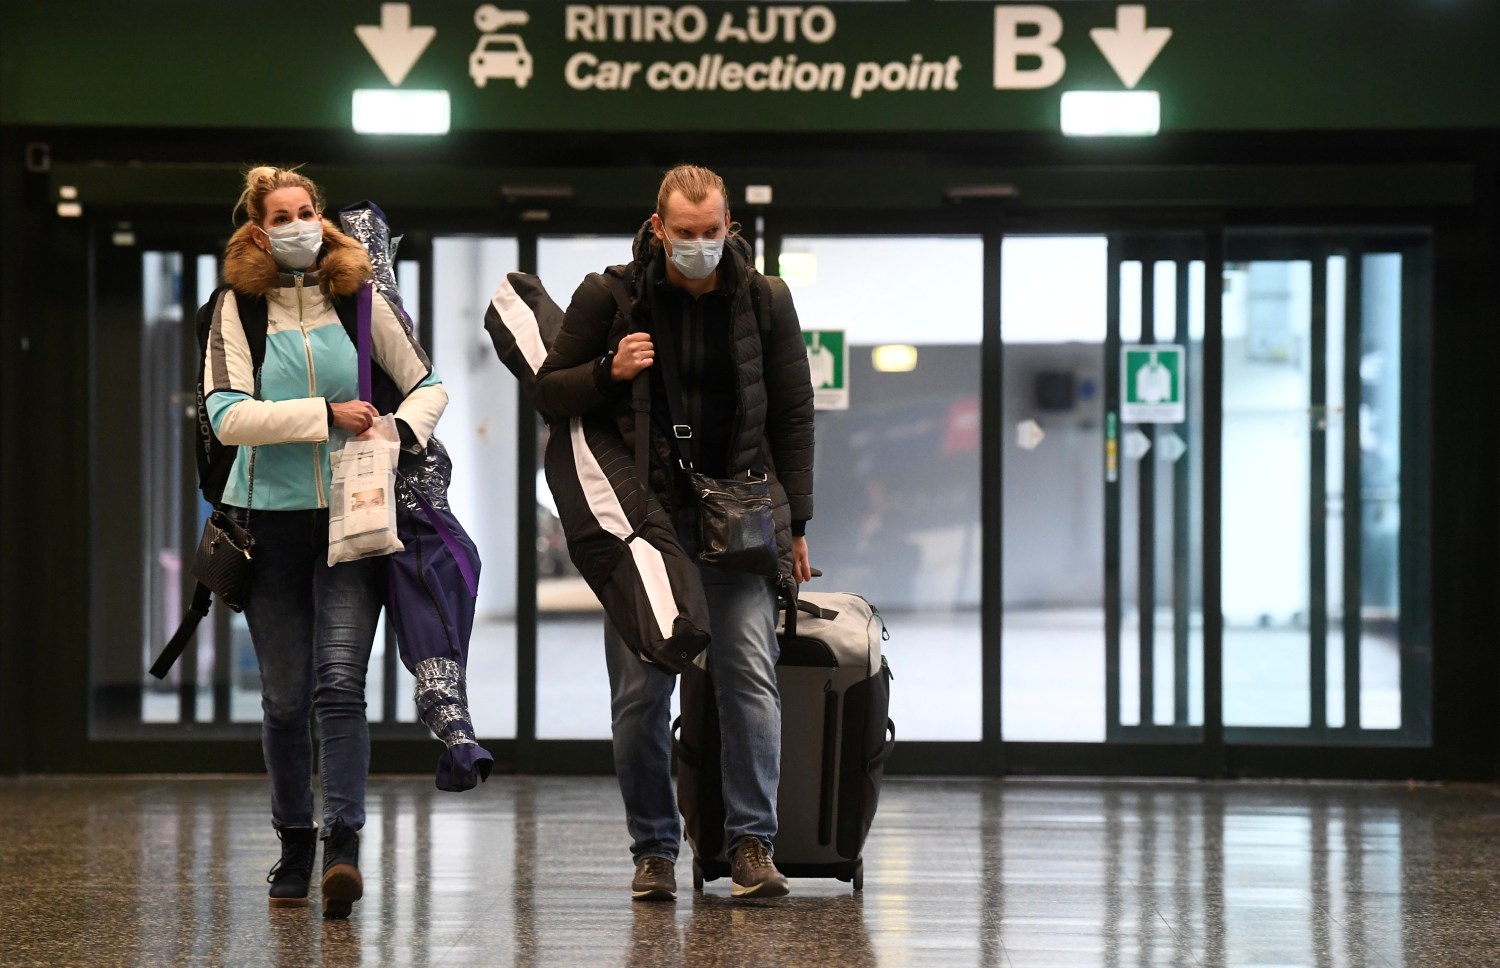 People wearing protective masks walk in Malpensa airport near Milan, Italy, March 9, 2020. REUTERS/Flavio Lo Scalzo